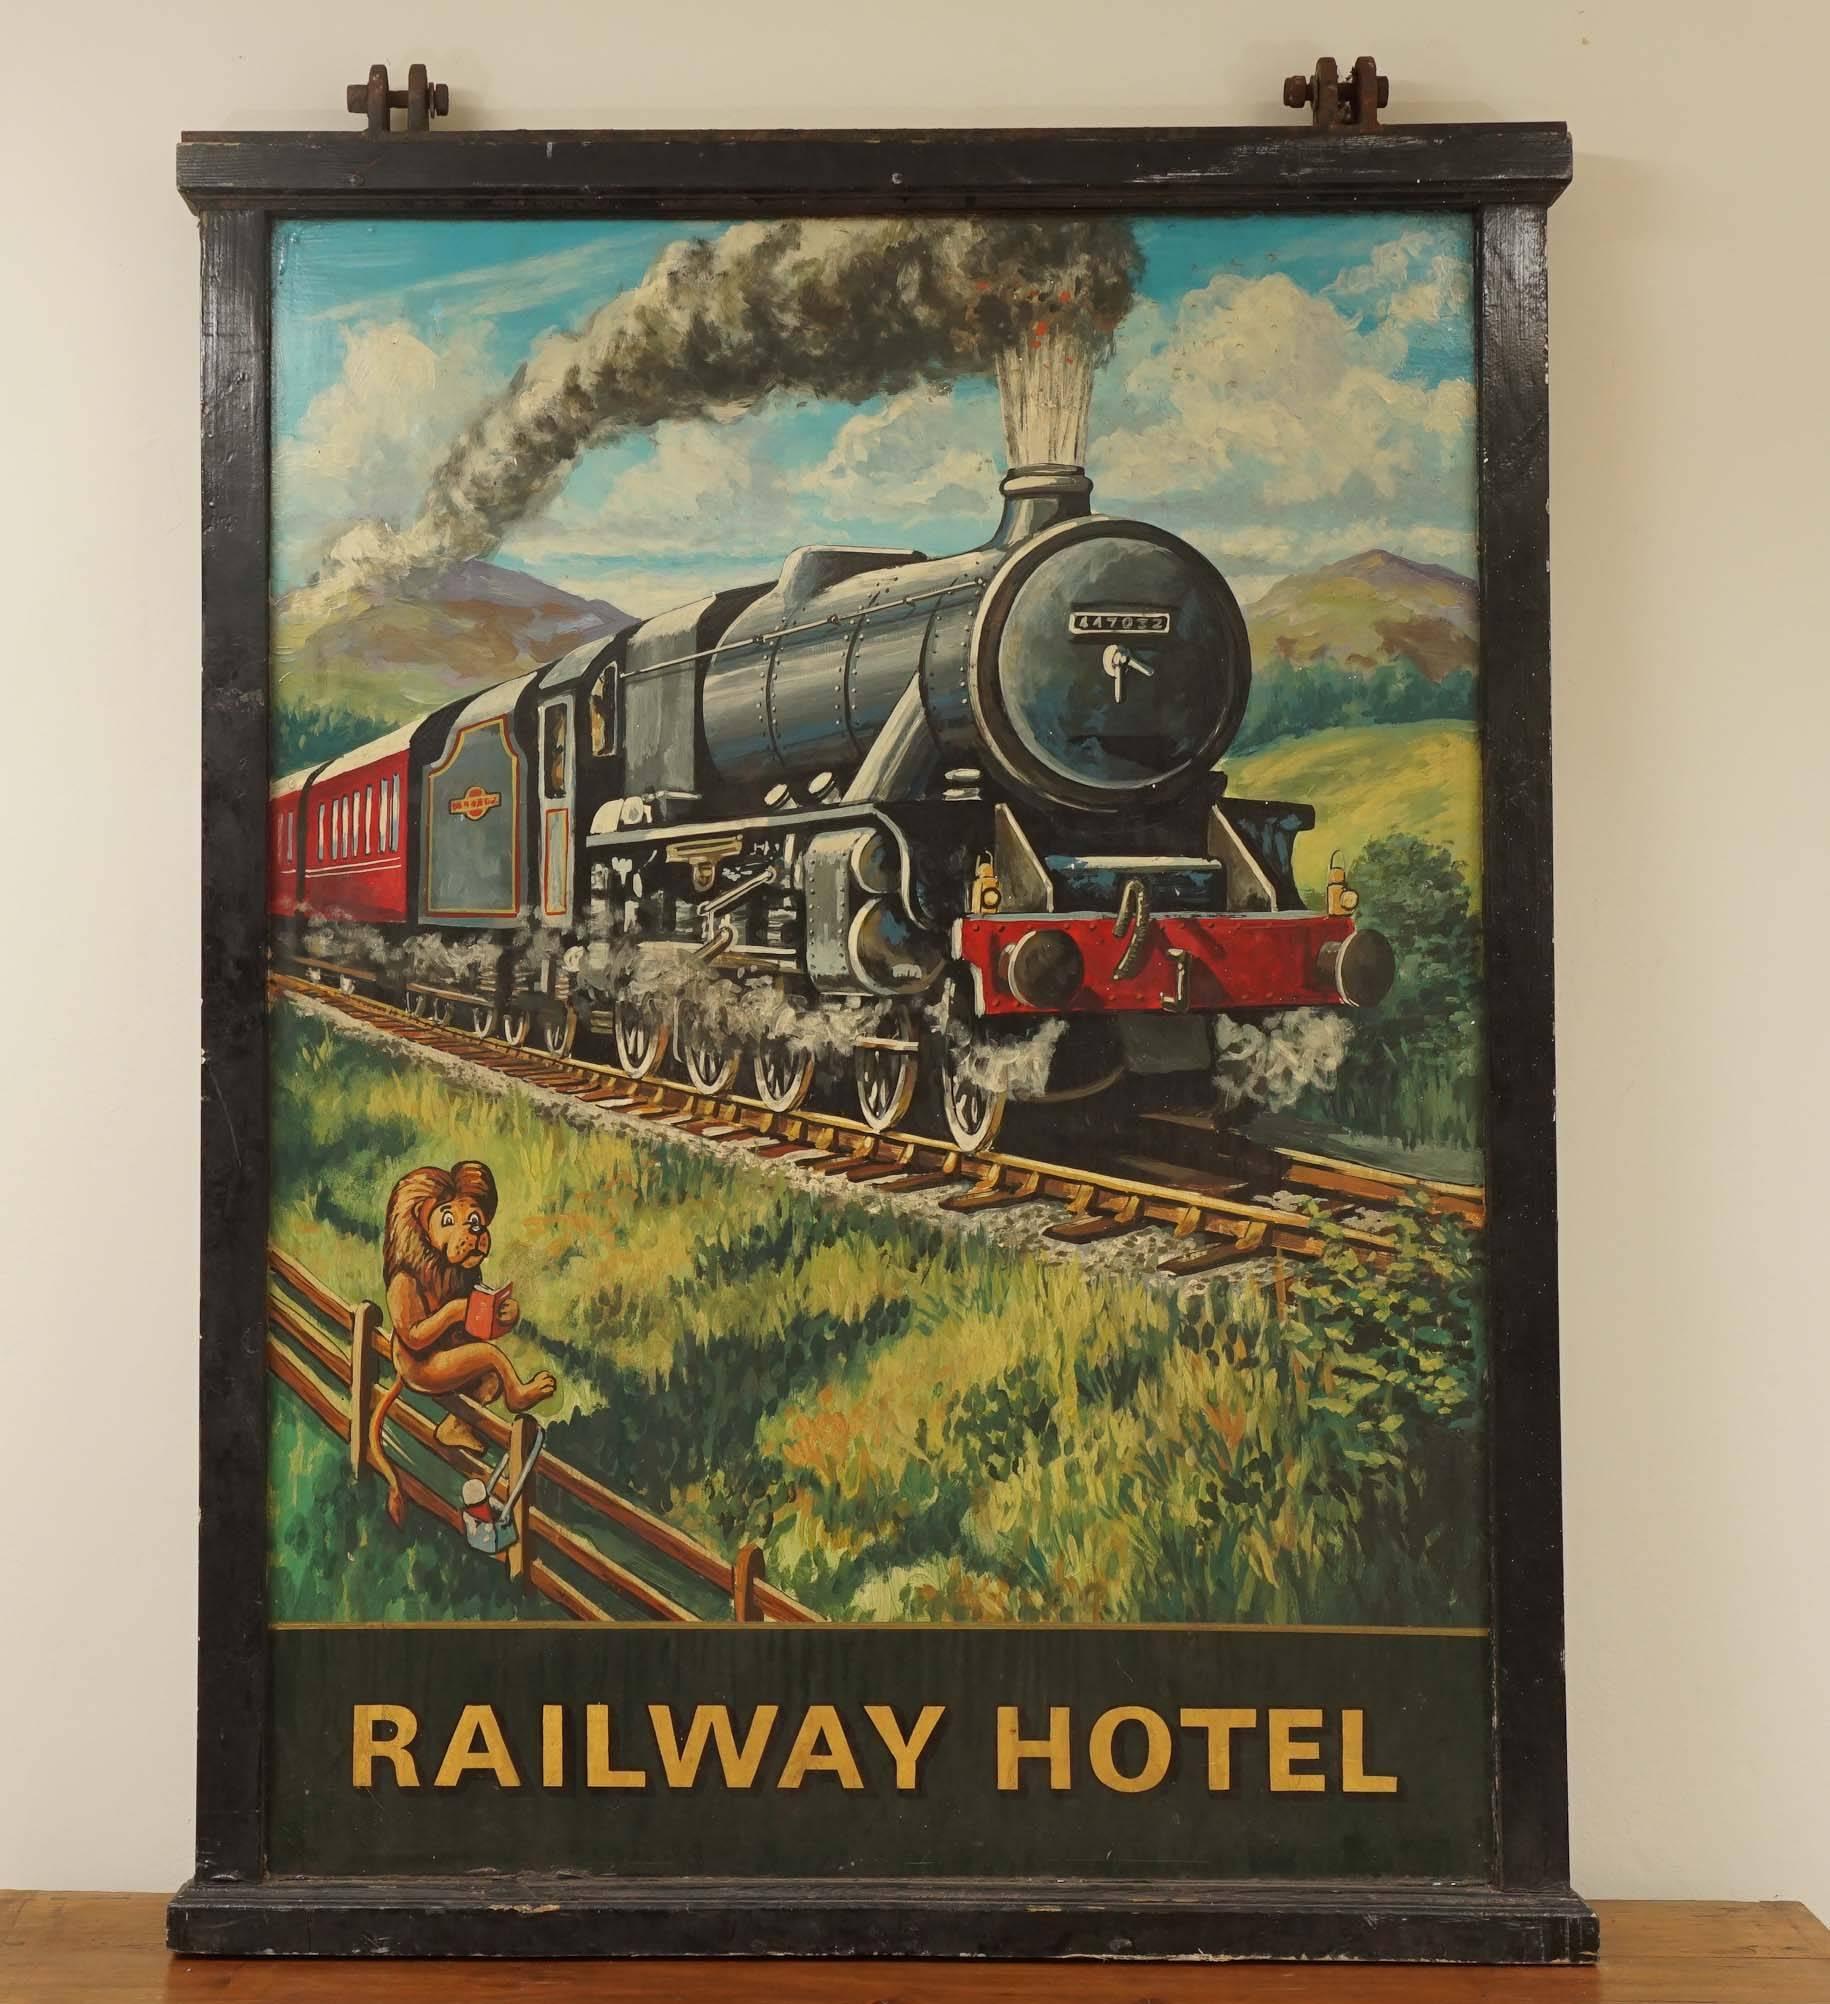 The Railway Hotel is located in several places in the UK and this two-sided sign sat outside and was visable from either side. Complete with its original frame and metal hooks to hold the sign, the subject matter is quite pleasing with crisp colors.